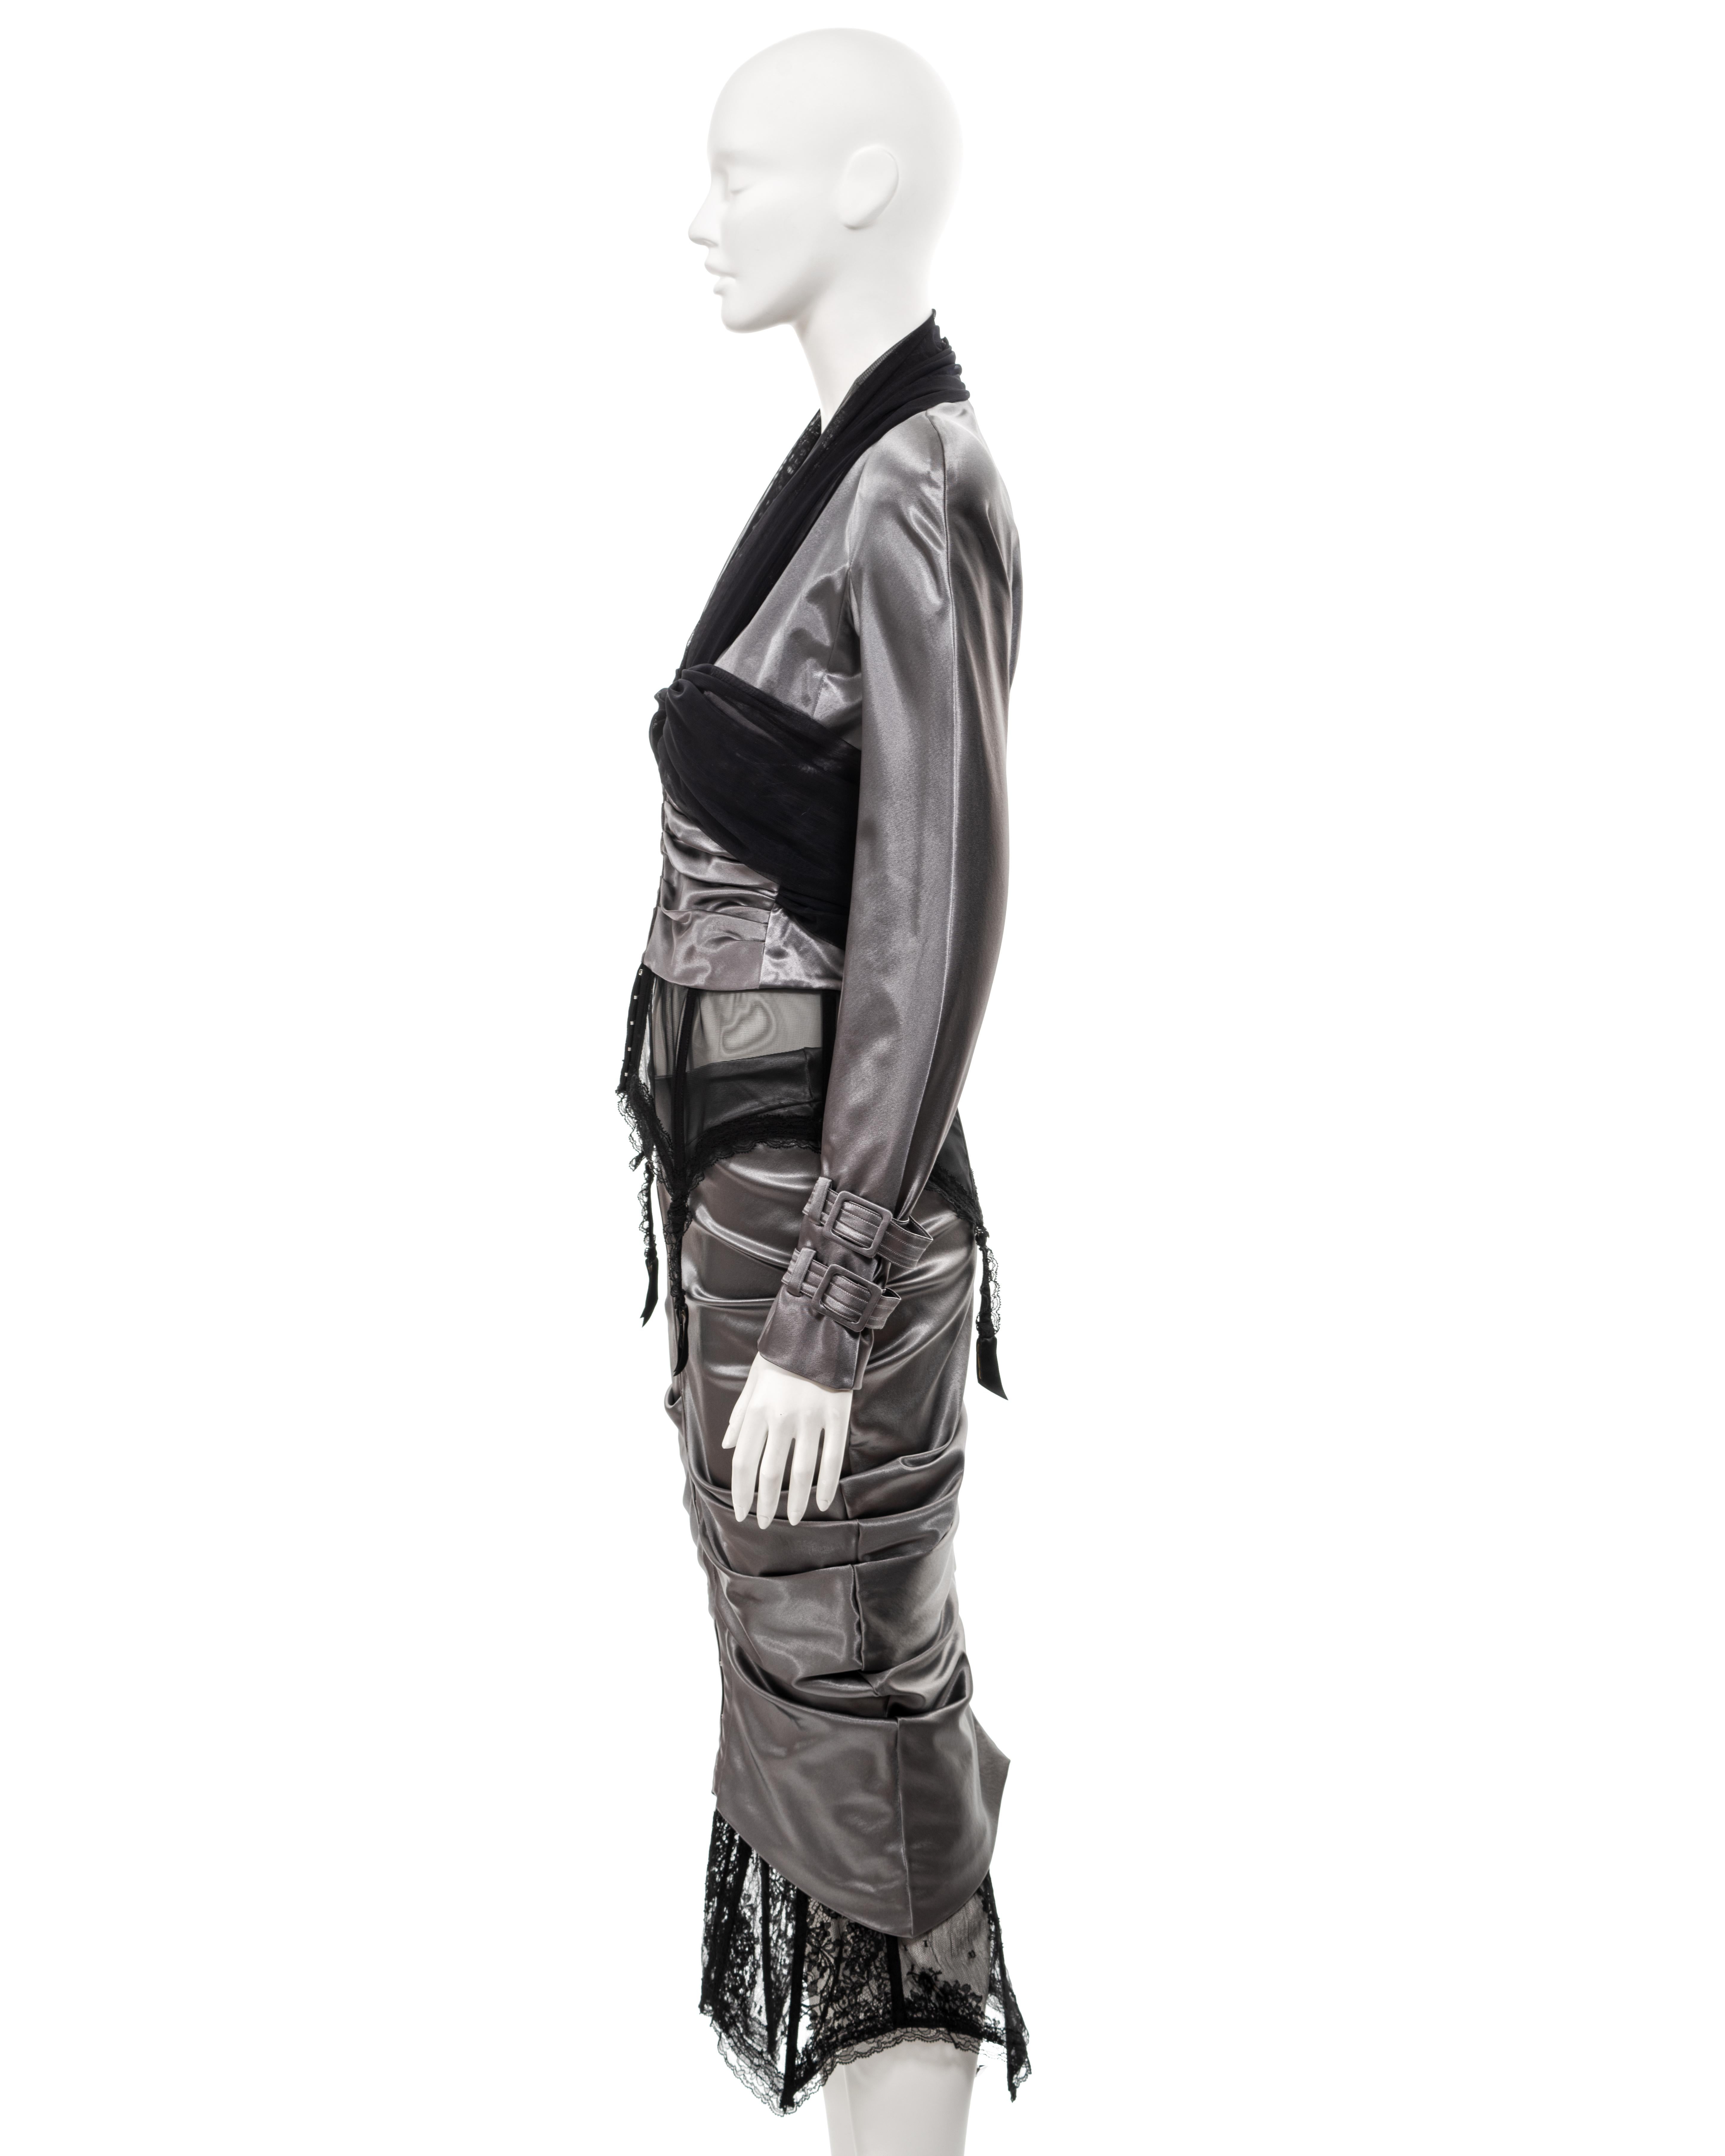 Christian Dior by John Galliano silver-grey stretch satin skirt suit, ss 2004 13